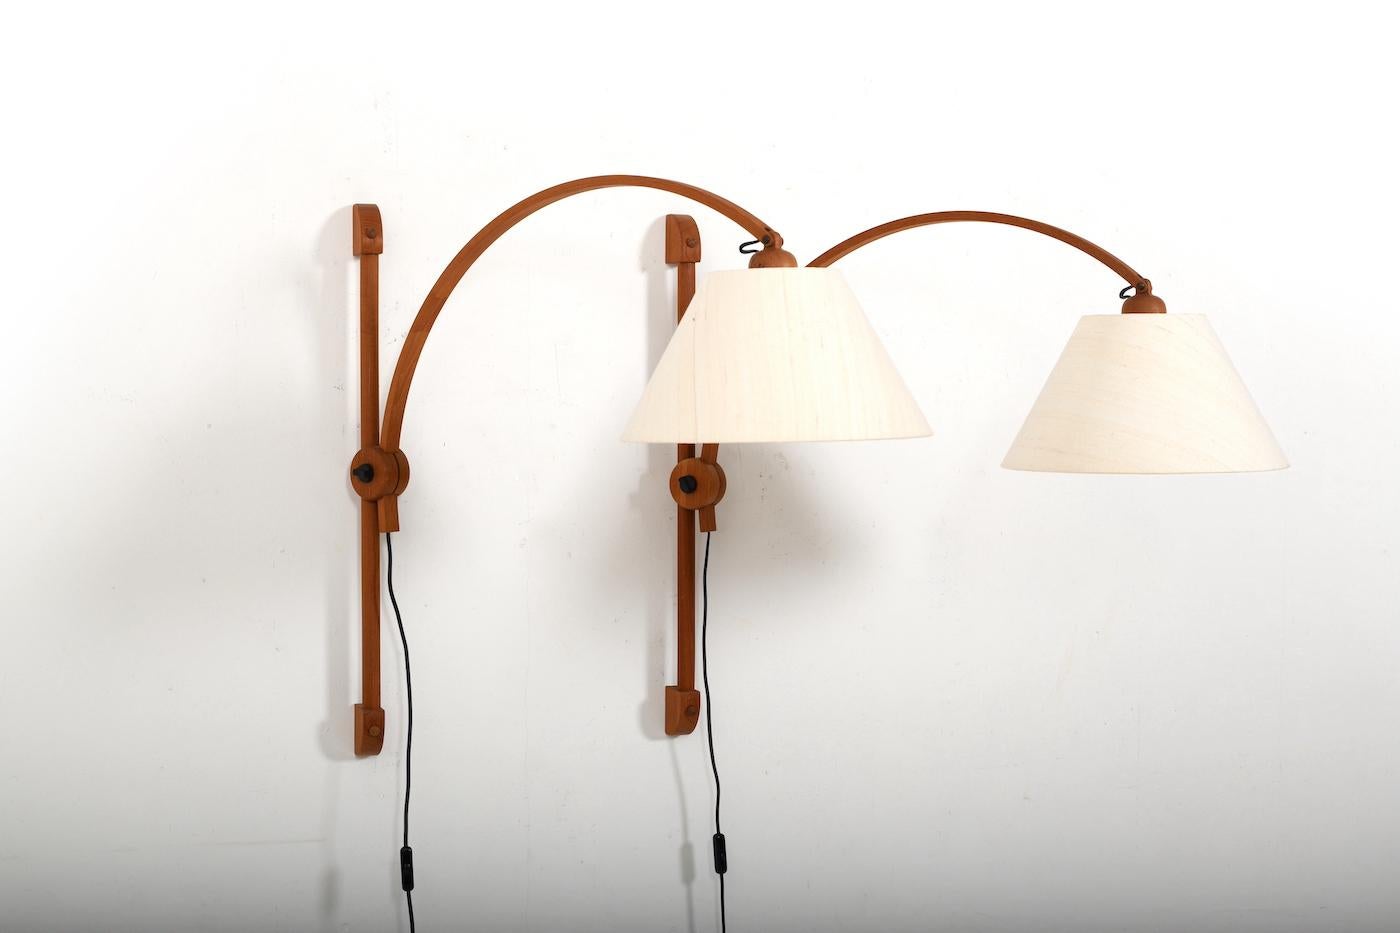 Pair of teak wall lamps by Domus Denmark 1970s. Lamp arms adjustable in depth and height. In top condition with original shades. Setprice.